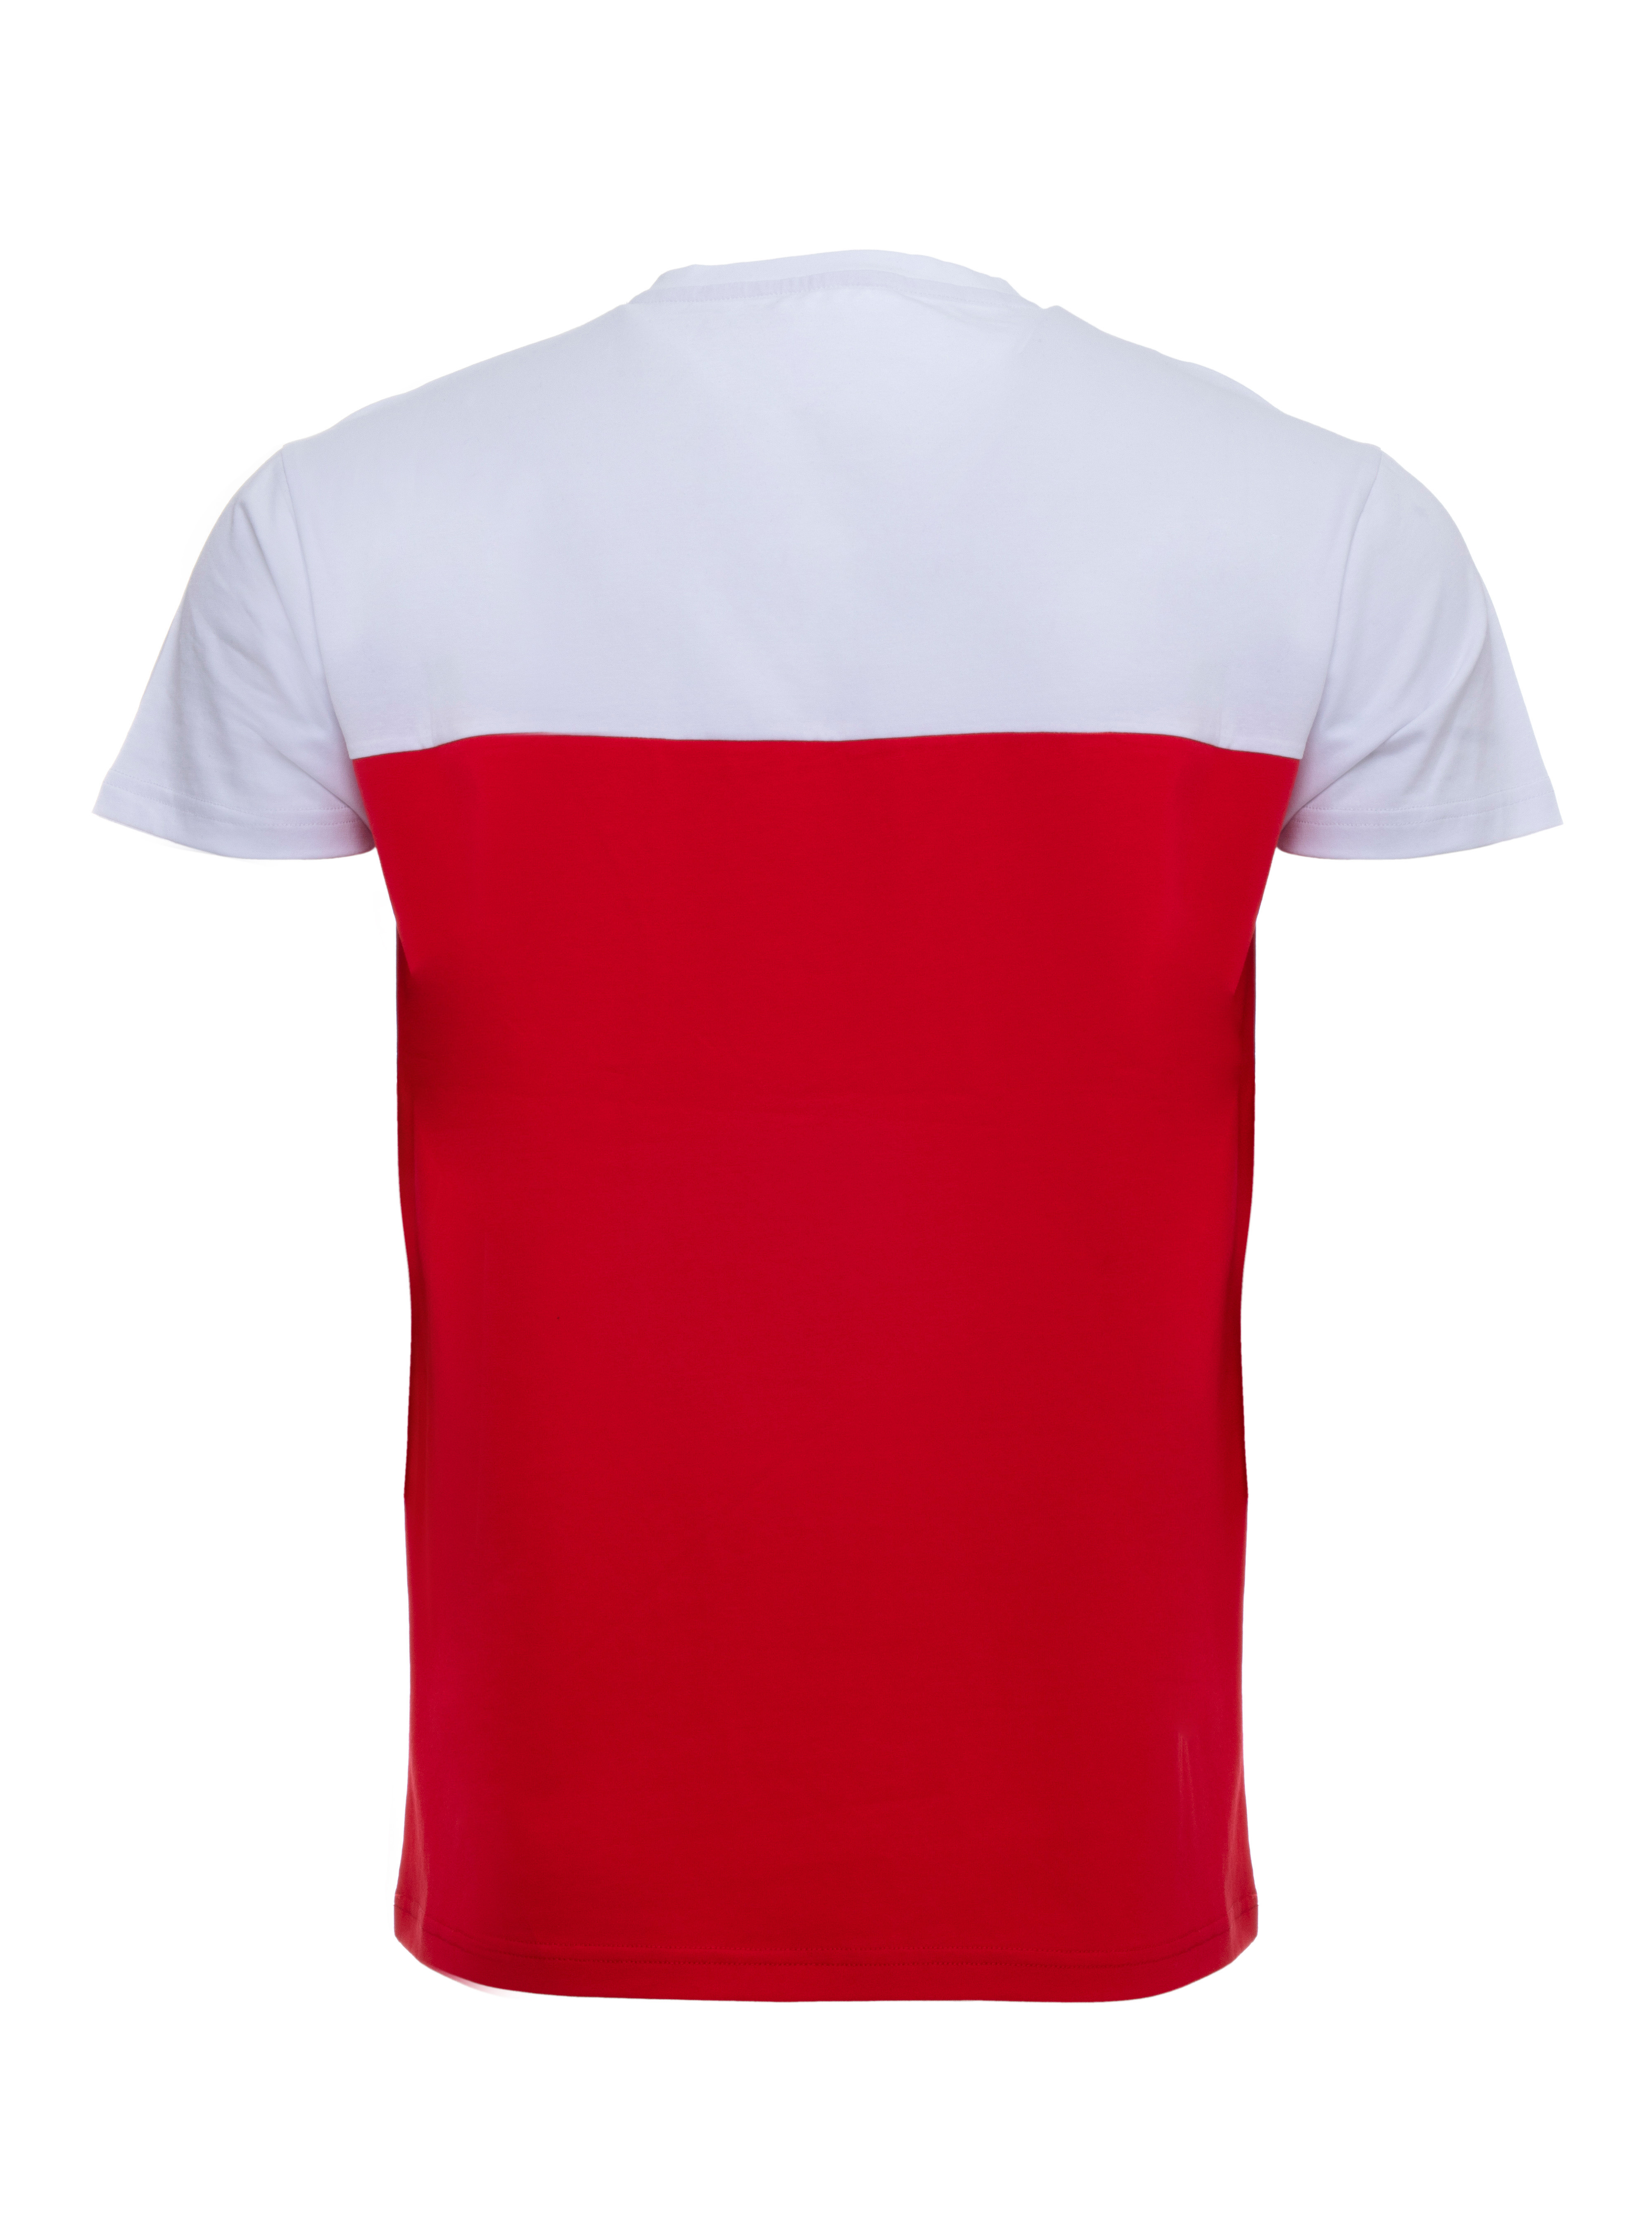 X RAY Men's Soft Stretch Cotton Solid Colorblock Short Sleeve V-Neck Slim Fit T-Shirt, Fashion Sport Casual Tee for Men, Red/White Size XXX-Large - image 2 of 4